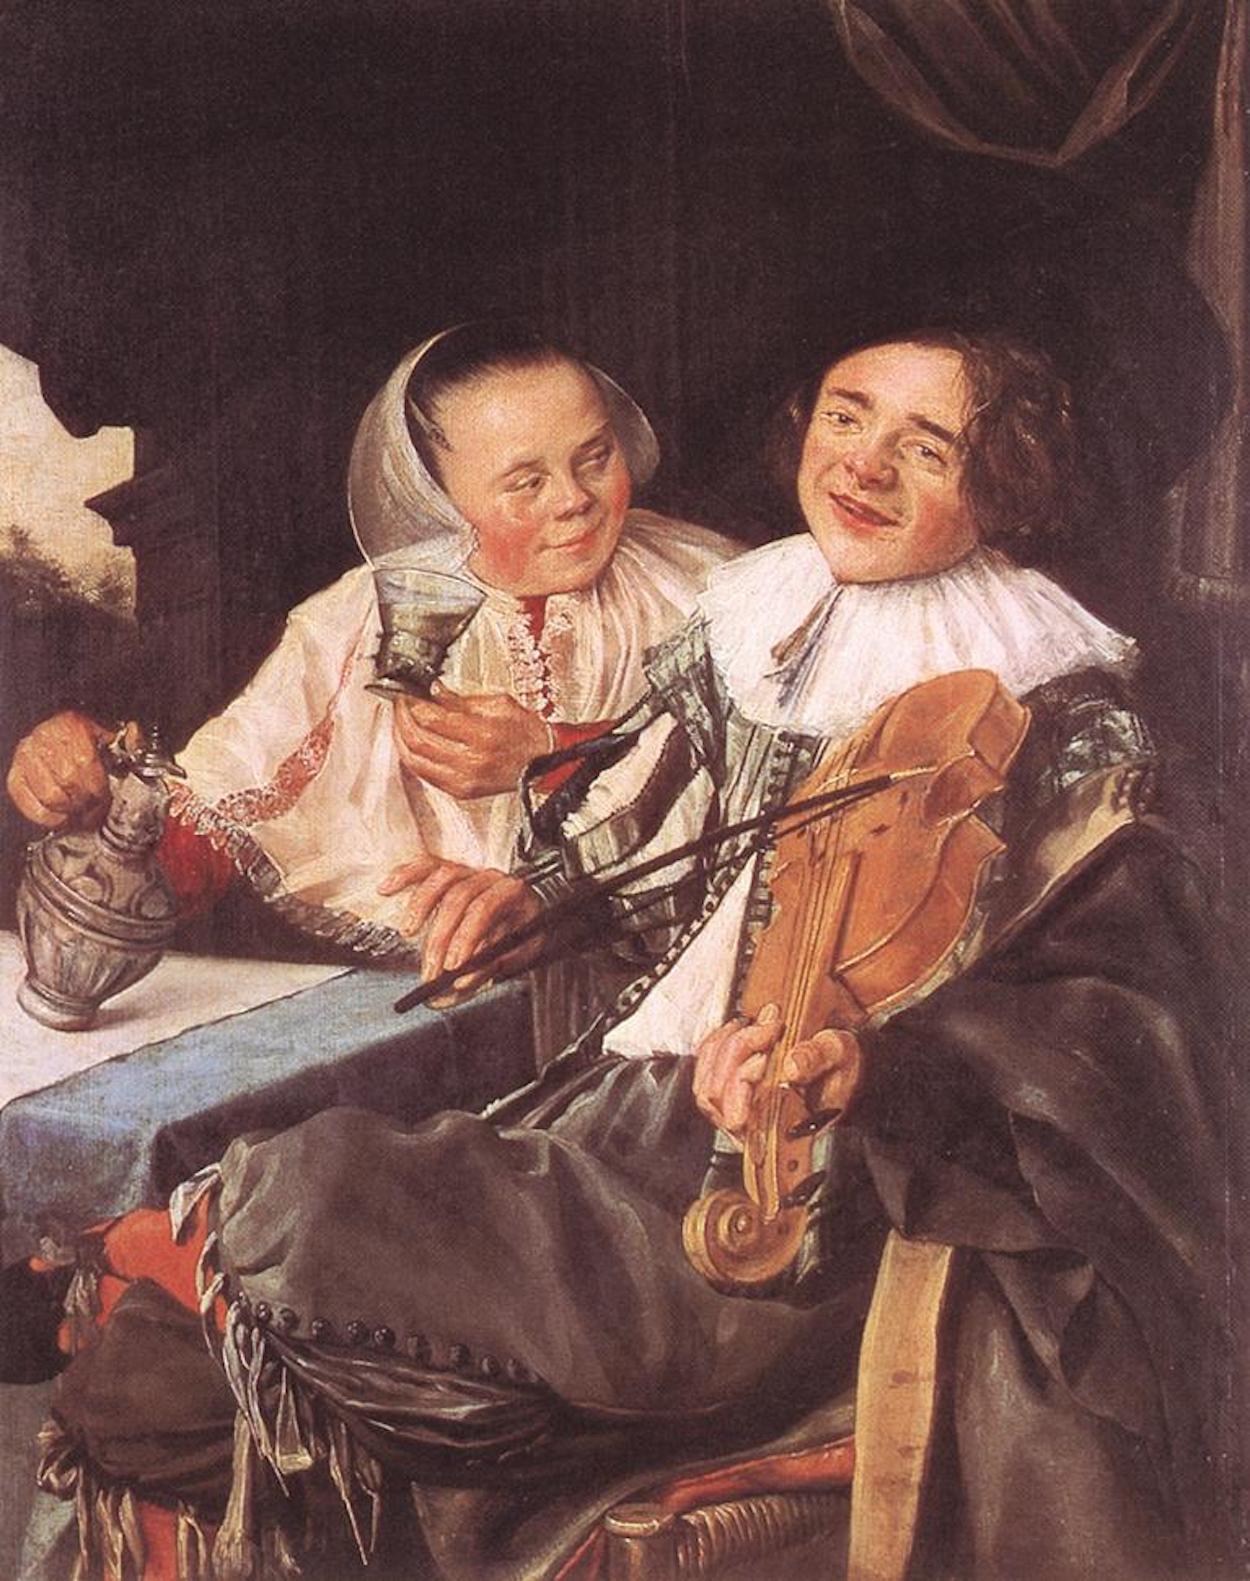 The Carousing Couple by Judith Leyster - 1630 - 68 x 54 cm Musée du Louvre